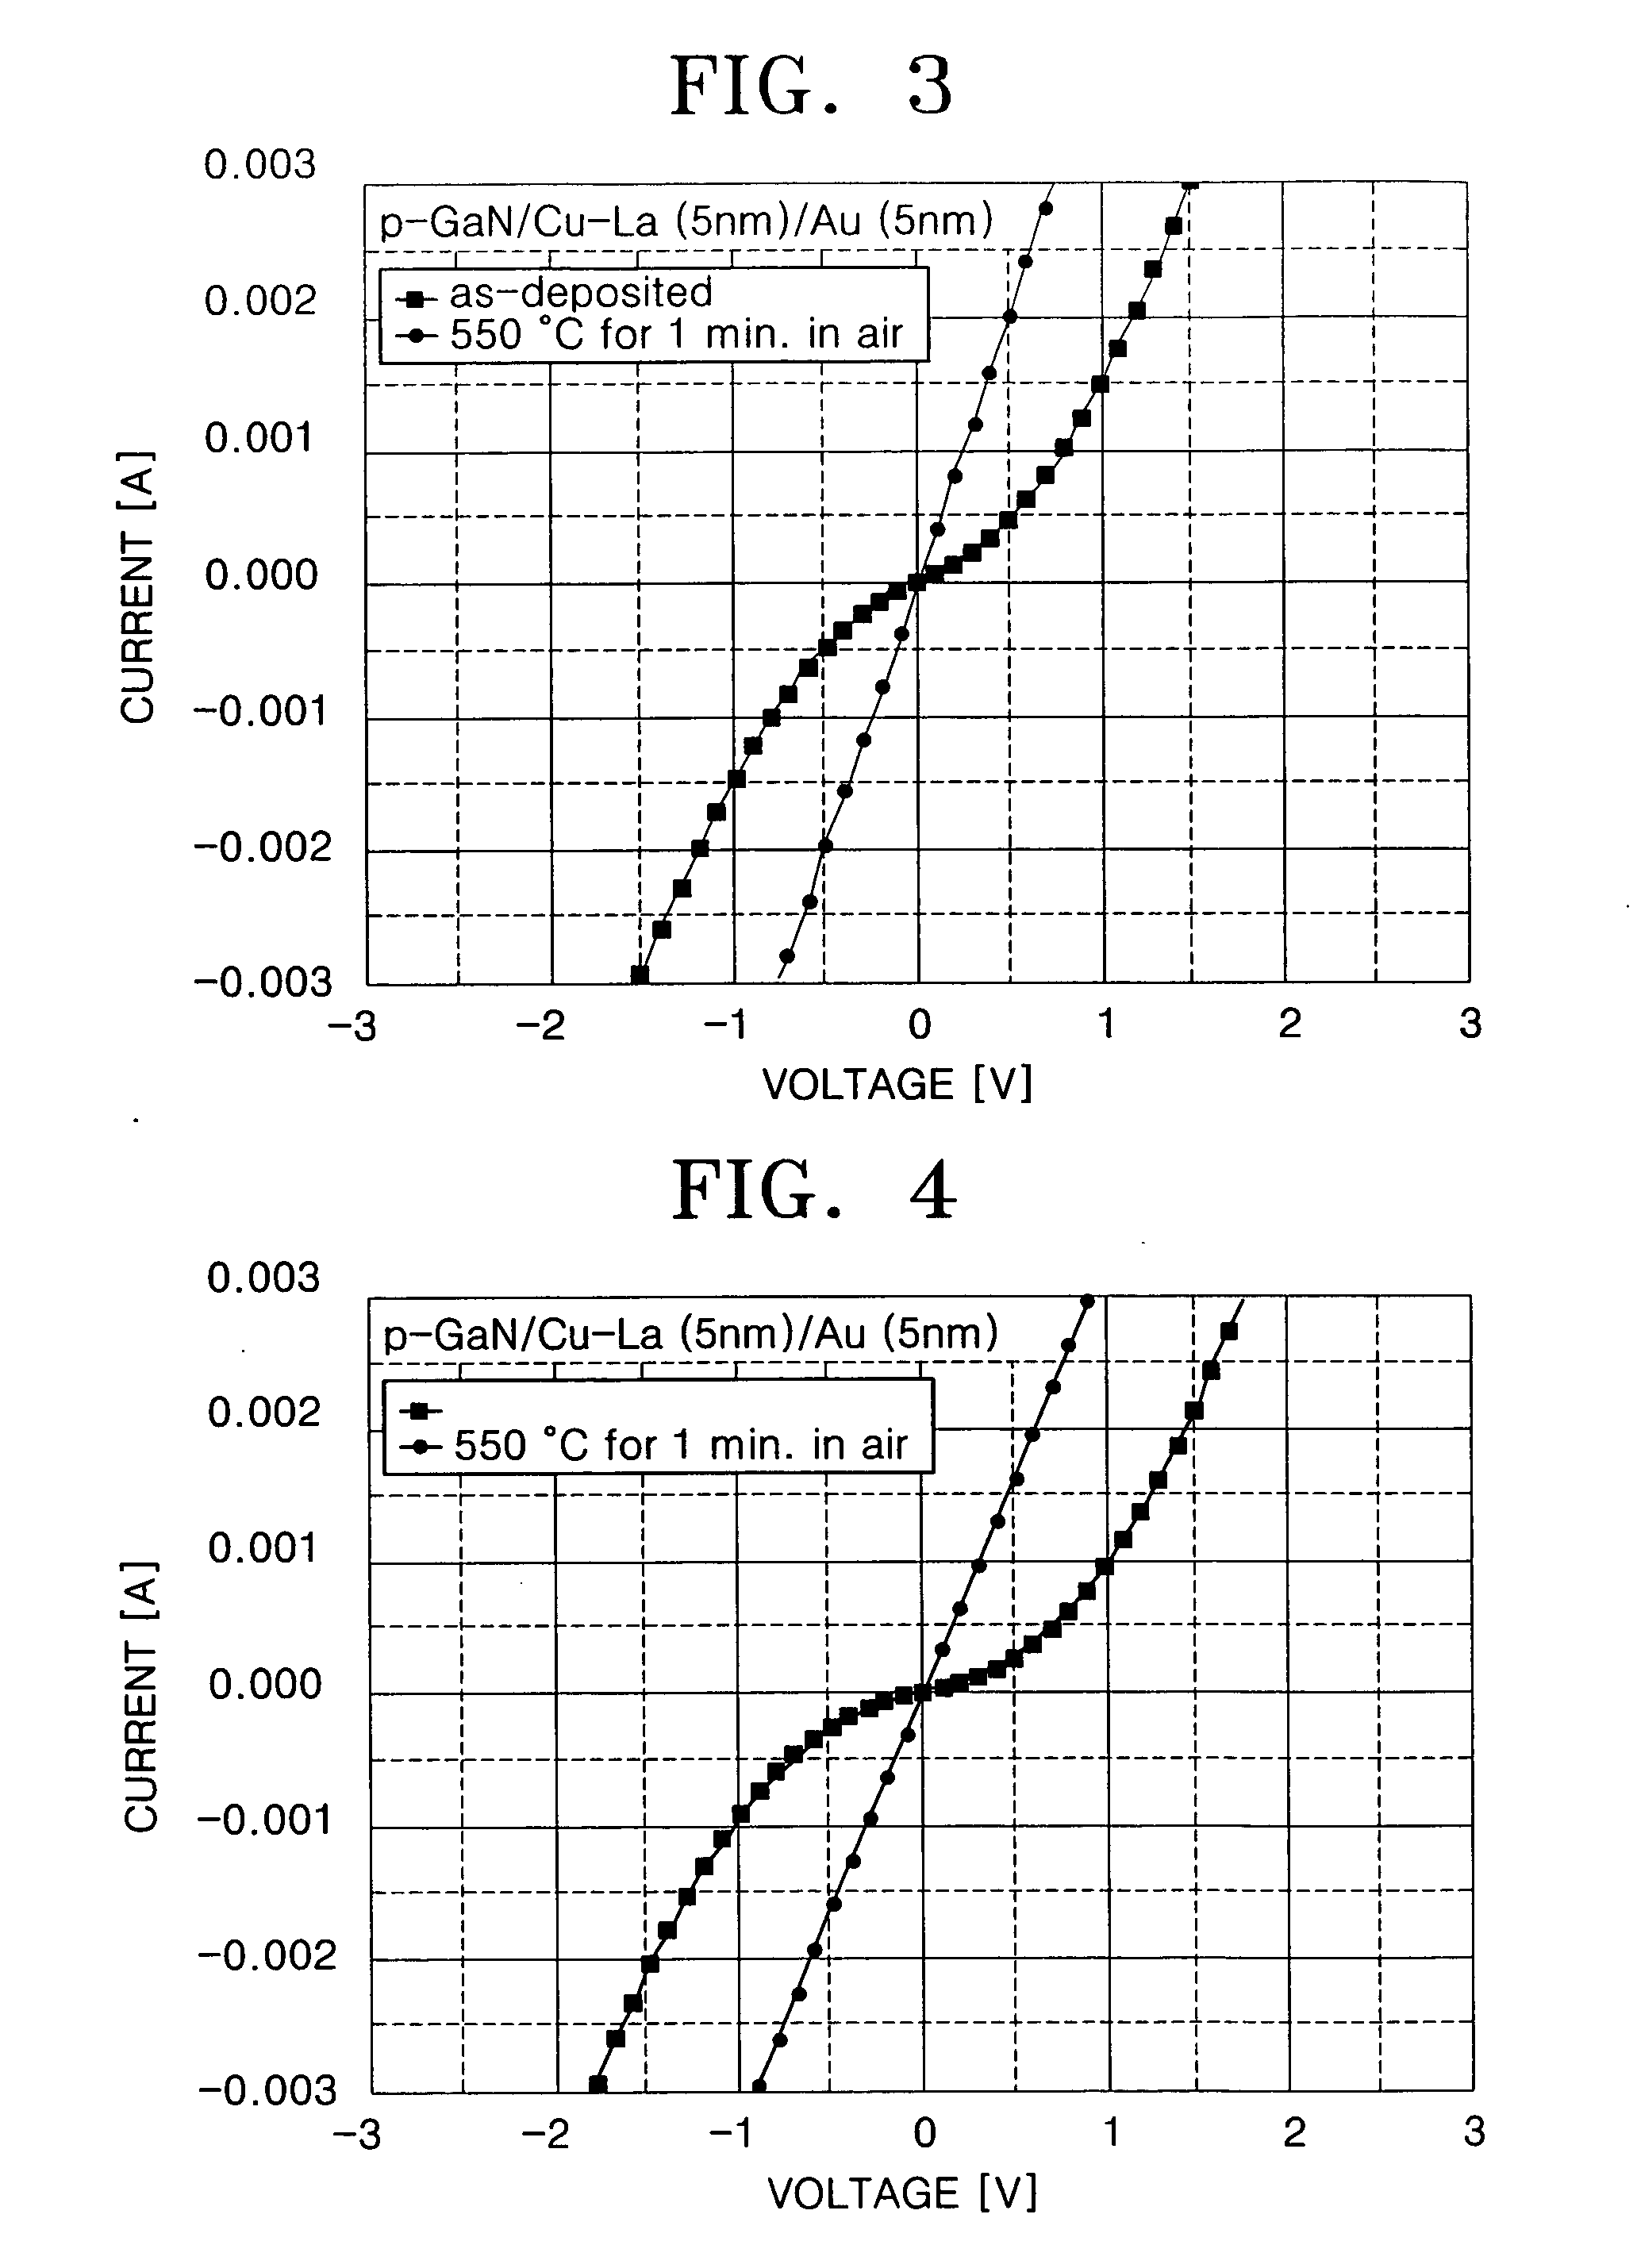 Thin film electrode for high-quality GaN optical devices and method of fabricating the same